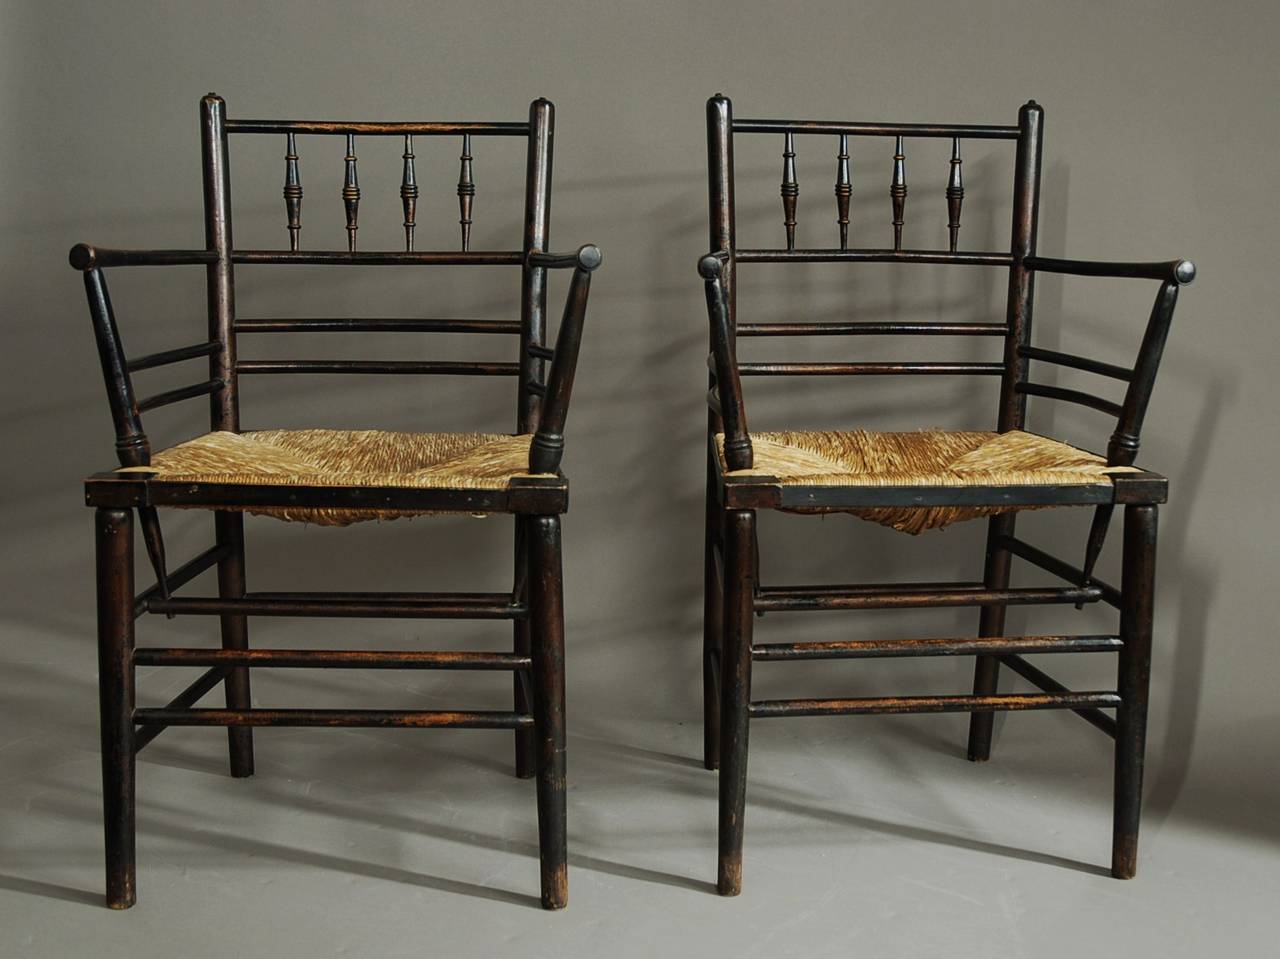 A set of six Morris & Co. Sussex chairs designed by Phillip Webb, comprising of two carvers and four single chairs all in good, original condition purchased from a private collection.

The chairs consist of four turned spindles on the back rail